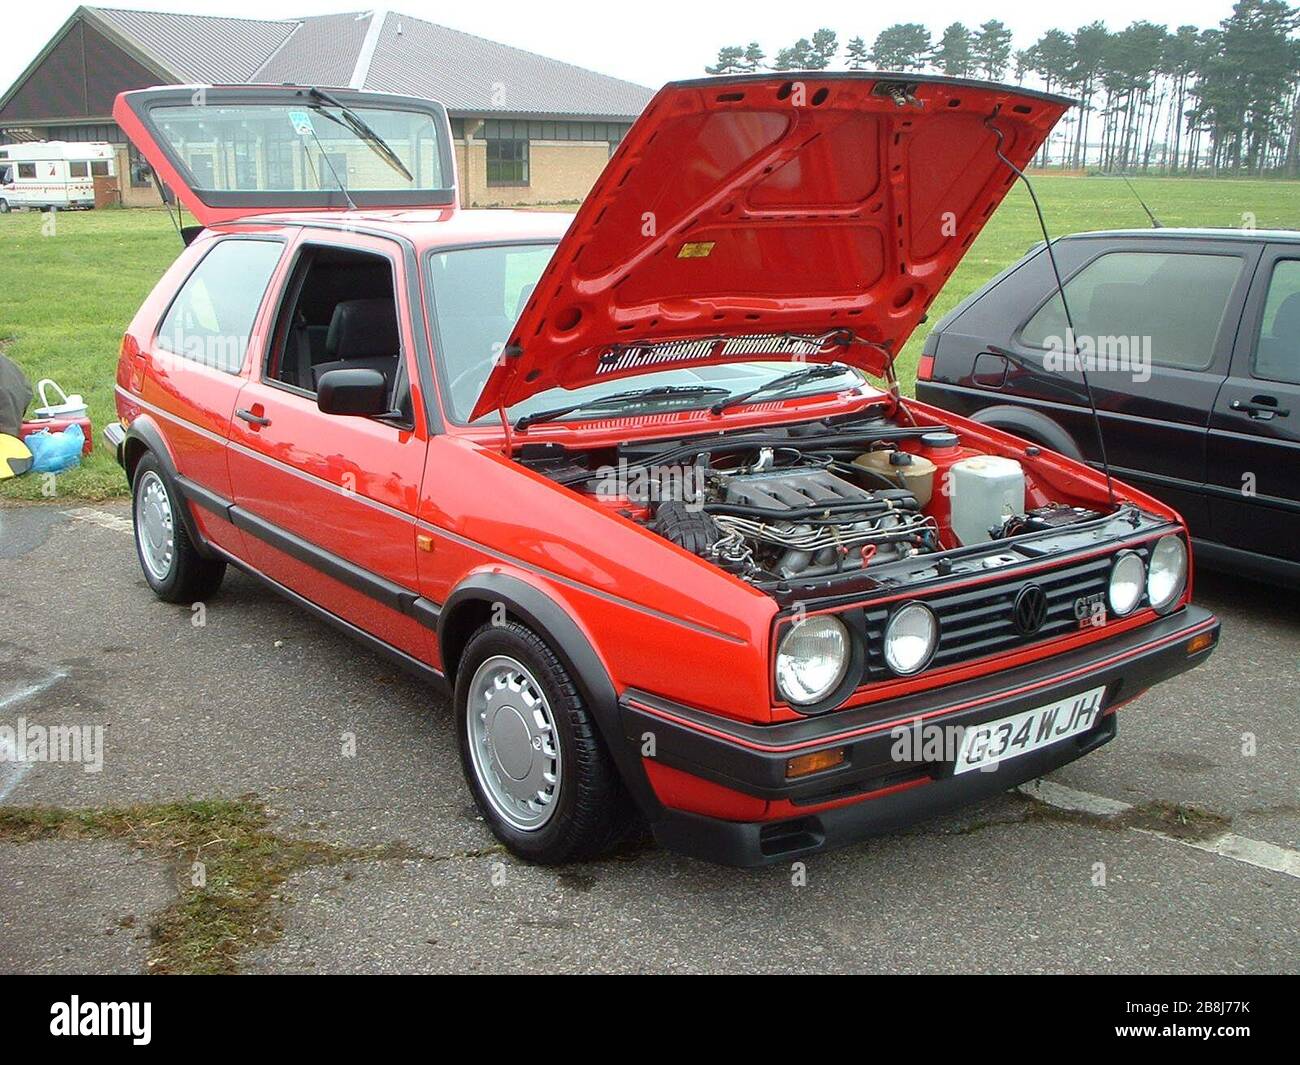 English: Volkswagen Golf Mk2 16v Show Car, Photograph taken by the Wikipedia  member at GTi International show (UK) in 2004, Car is not member's own.; 21  February 2006 (original upload date); Transferred